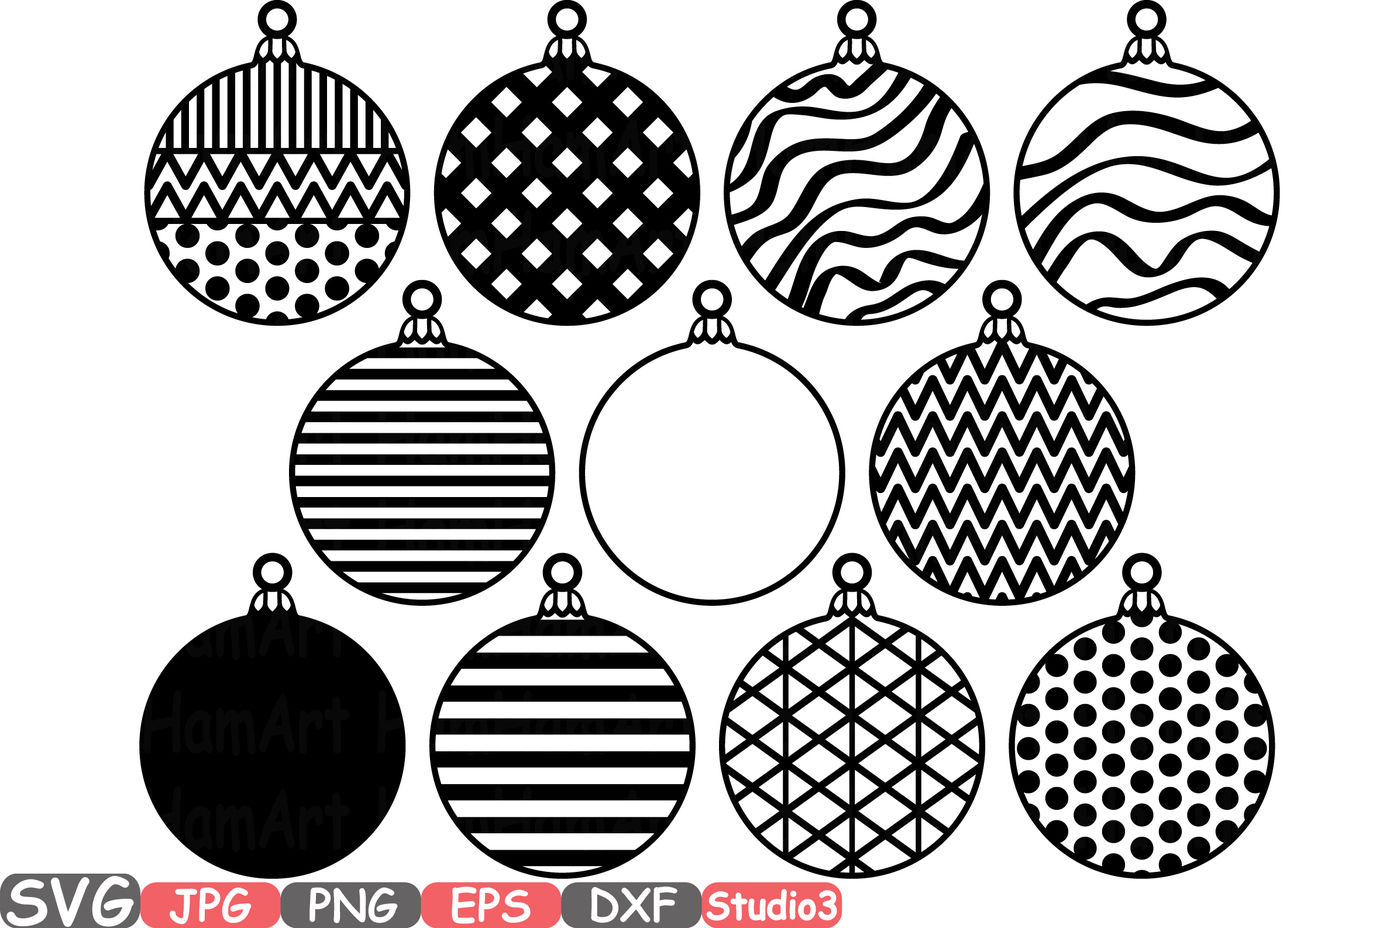 ori 81971 8cf3e16ad97a473fd7c07c72b6daa753bc4b6156 christmas balls and bells svg silhouette cutting files cricut studio3 cameo vinyl die cut machines monogram clipart bow new year ornament 684s